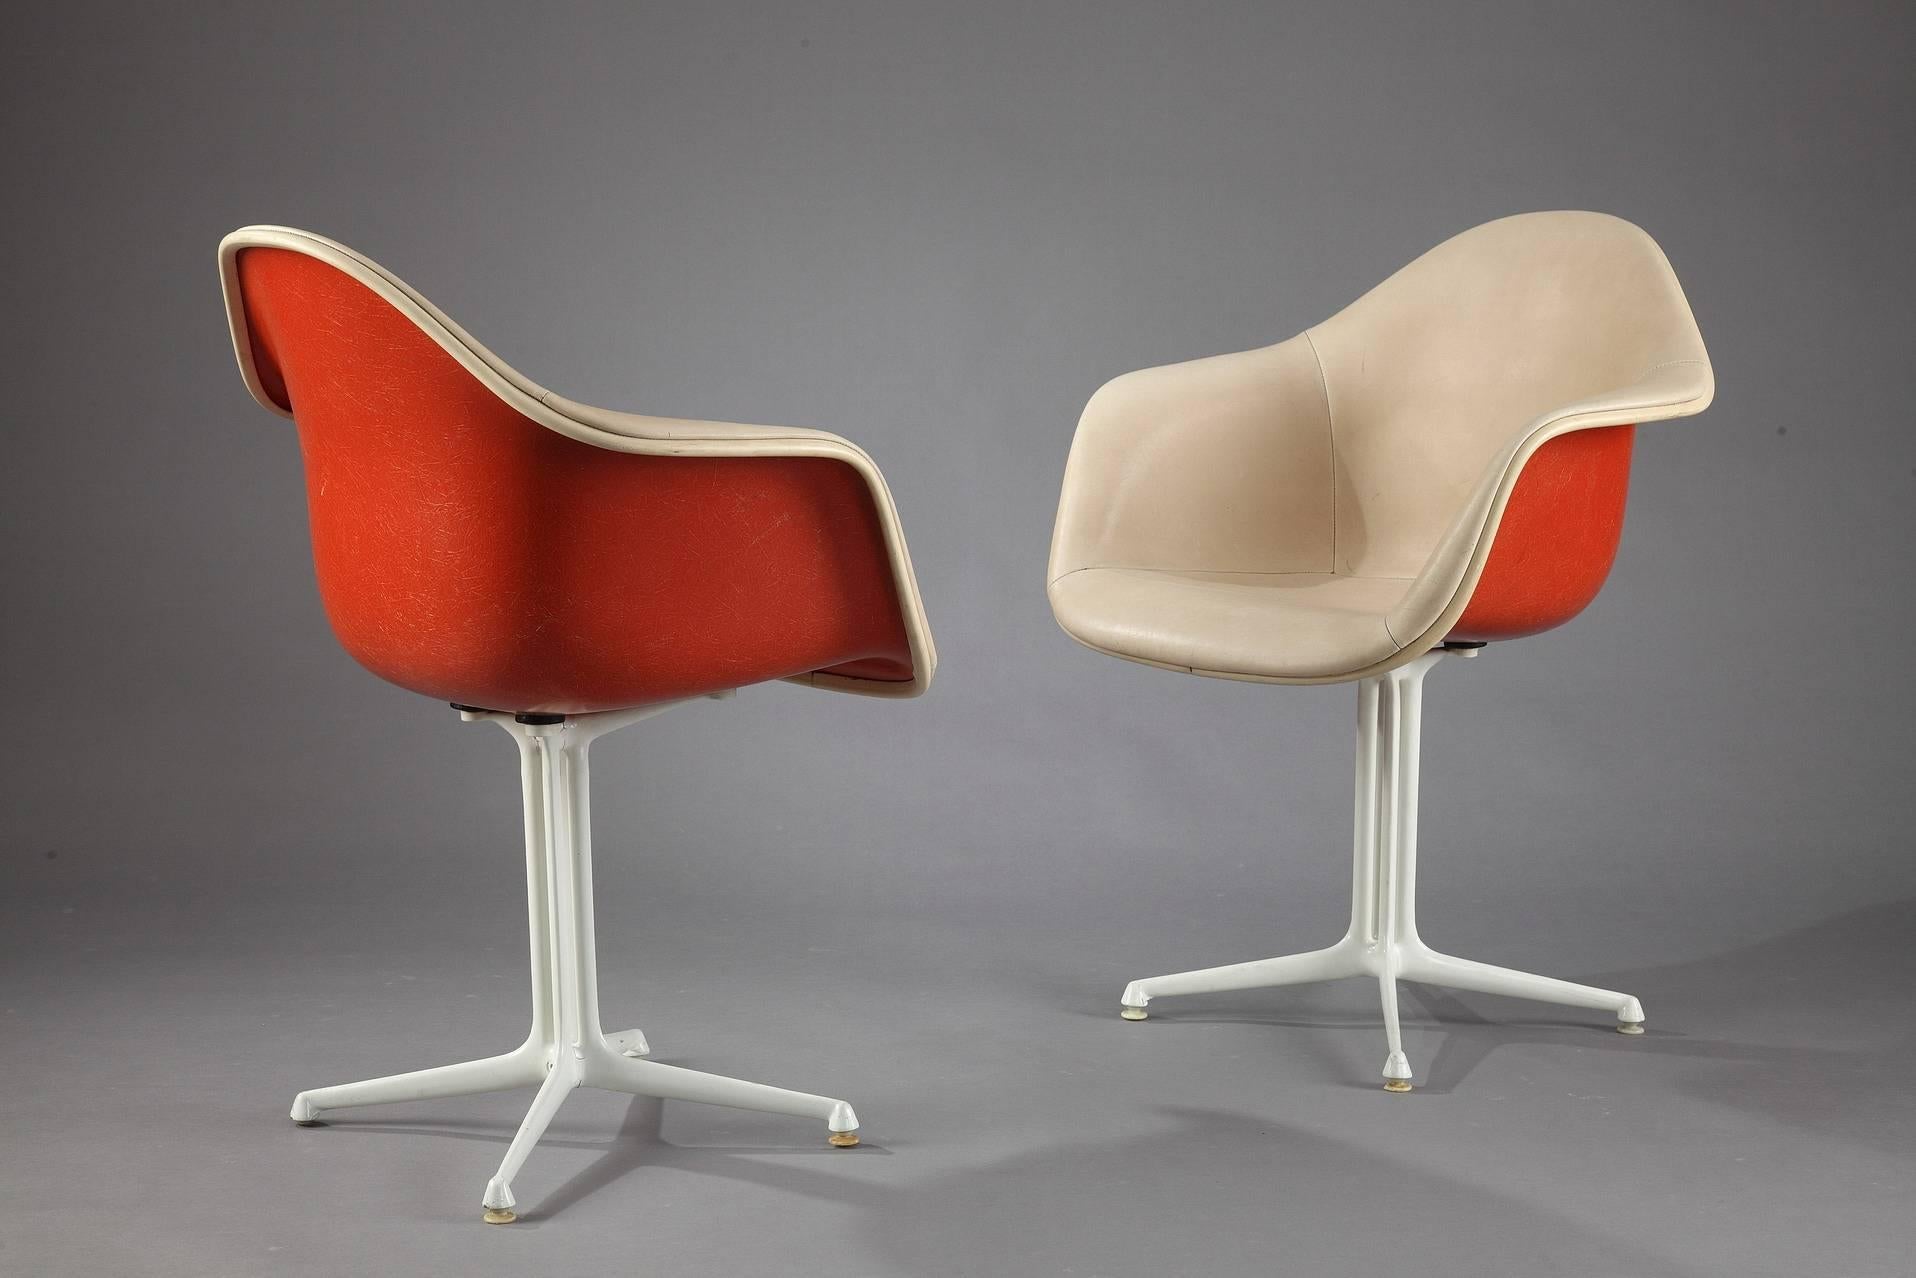 Pair of La Fonda chairs by Charles and Ray Eames, 1961, edited by Herman Miller. Orange fiberglass shell dressed in beige leather, on a base in white lacquered cast aluminium. Labelled by maker underneath: Interform Herman Miller 162 bd Voltaire